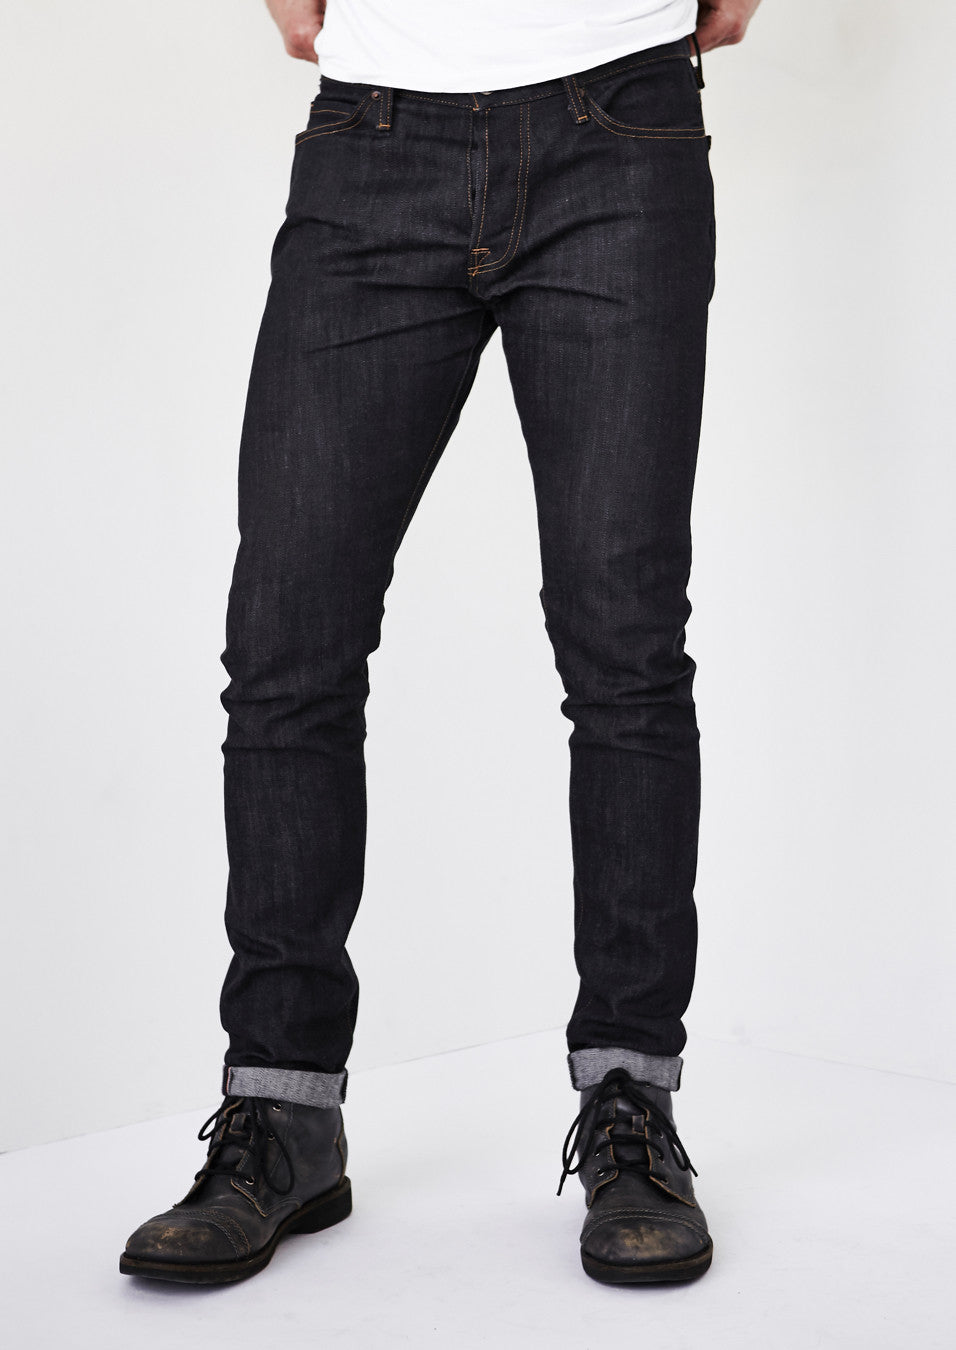 Selvage Loyal USA Collective Made in Jameson - in - Premium Denim The